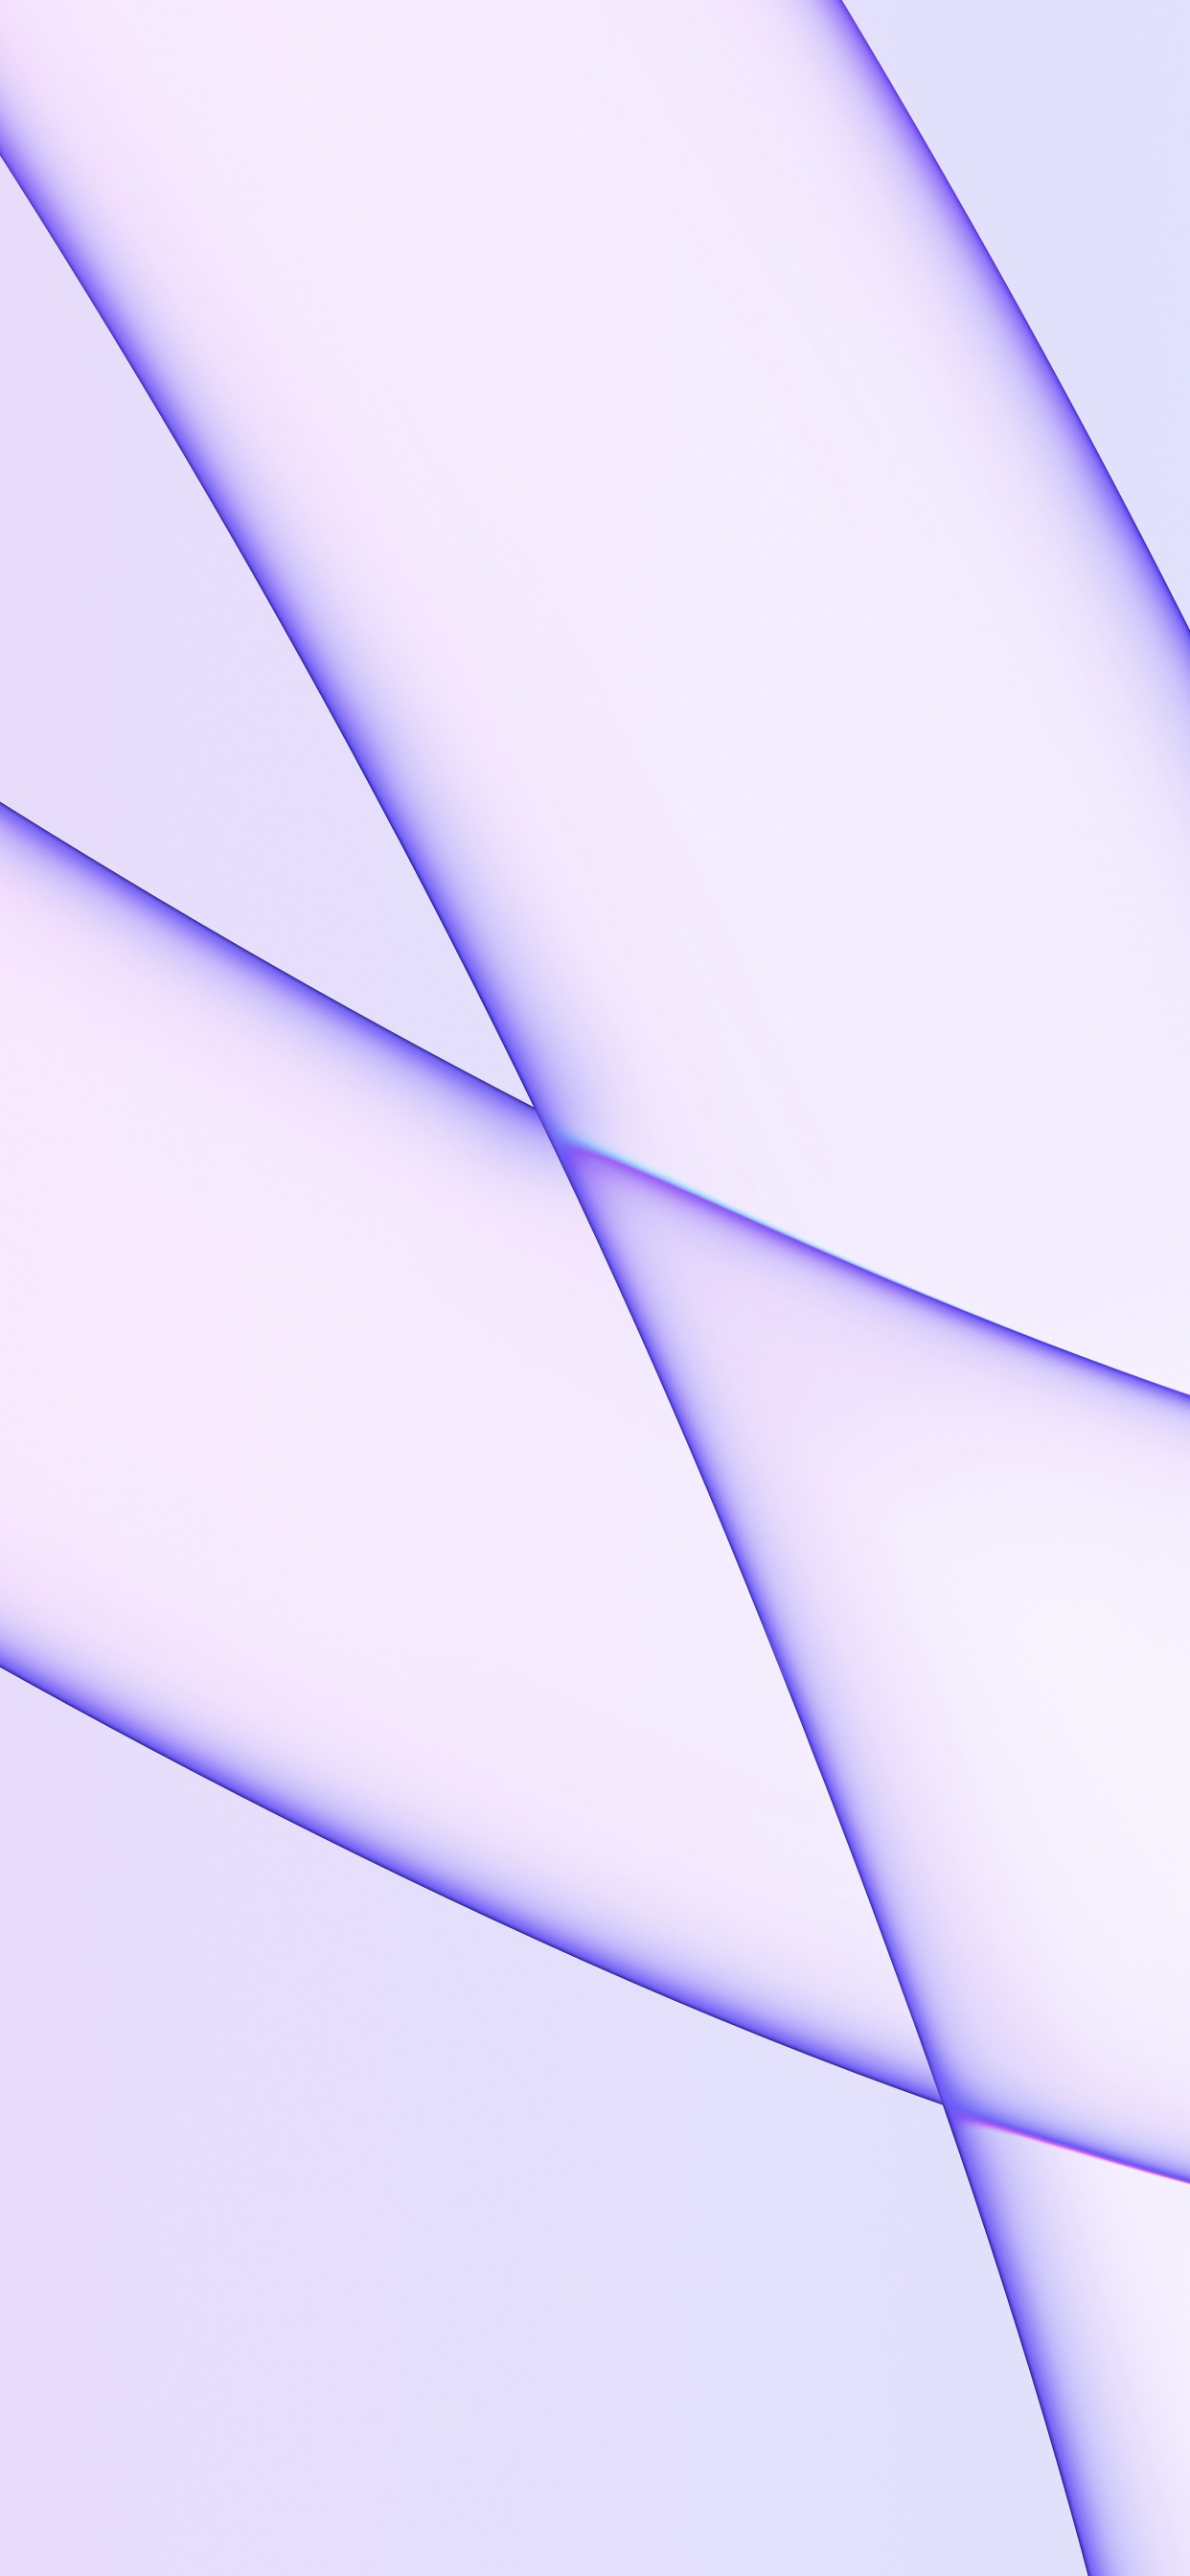 IMac Color Matching Wallpaper in Light Purple for IPad or Desktop. Wallpaper in 1242x2688 Resolution